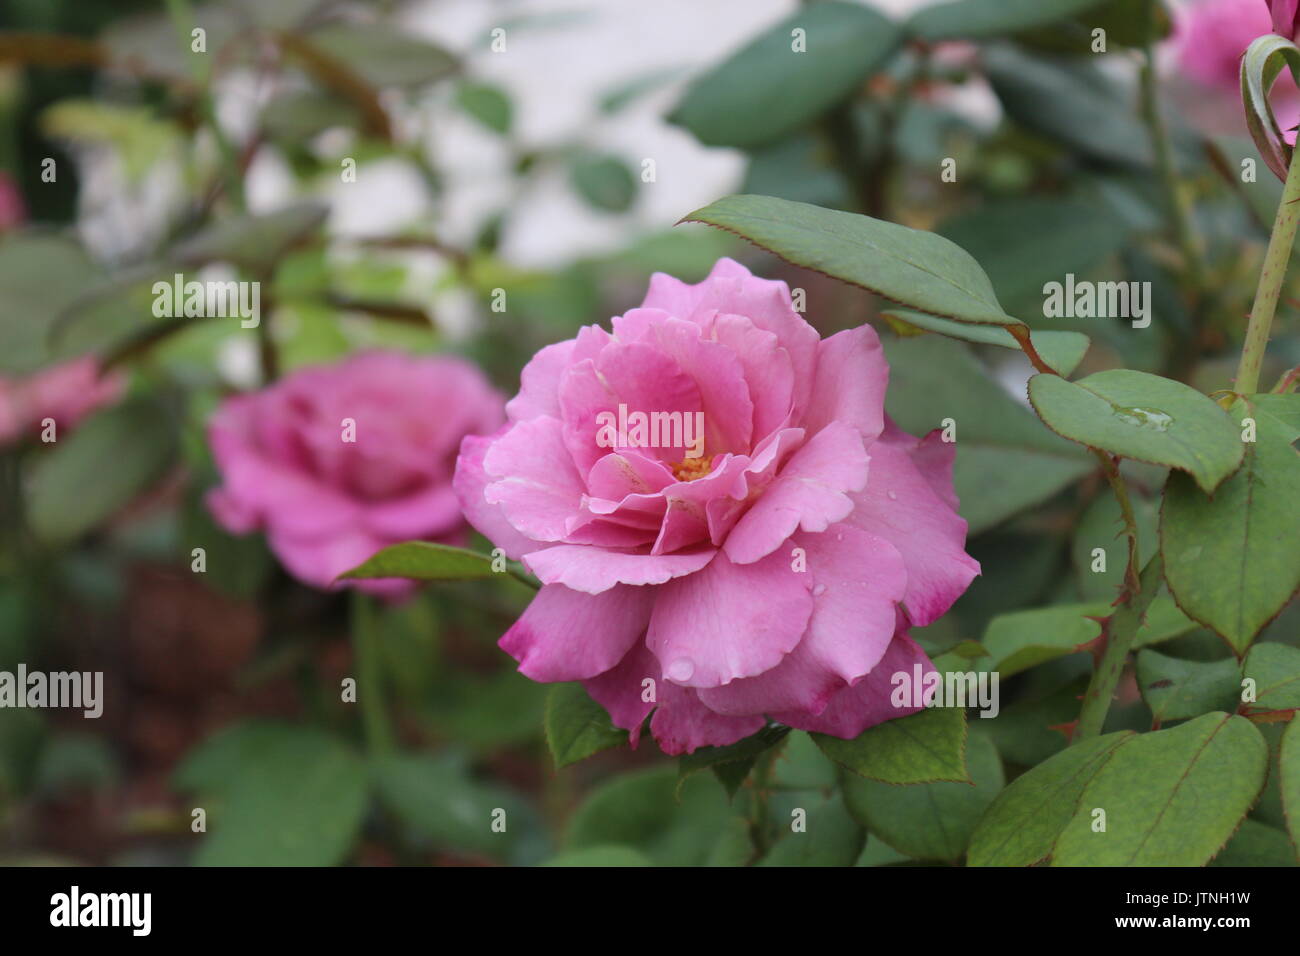 A wet pink rose on a rose bush with a leafy rose background. Stock Photo